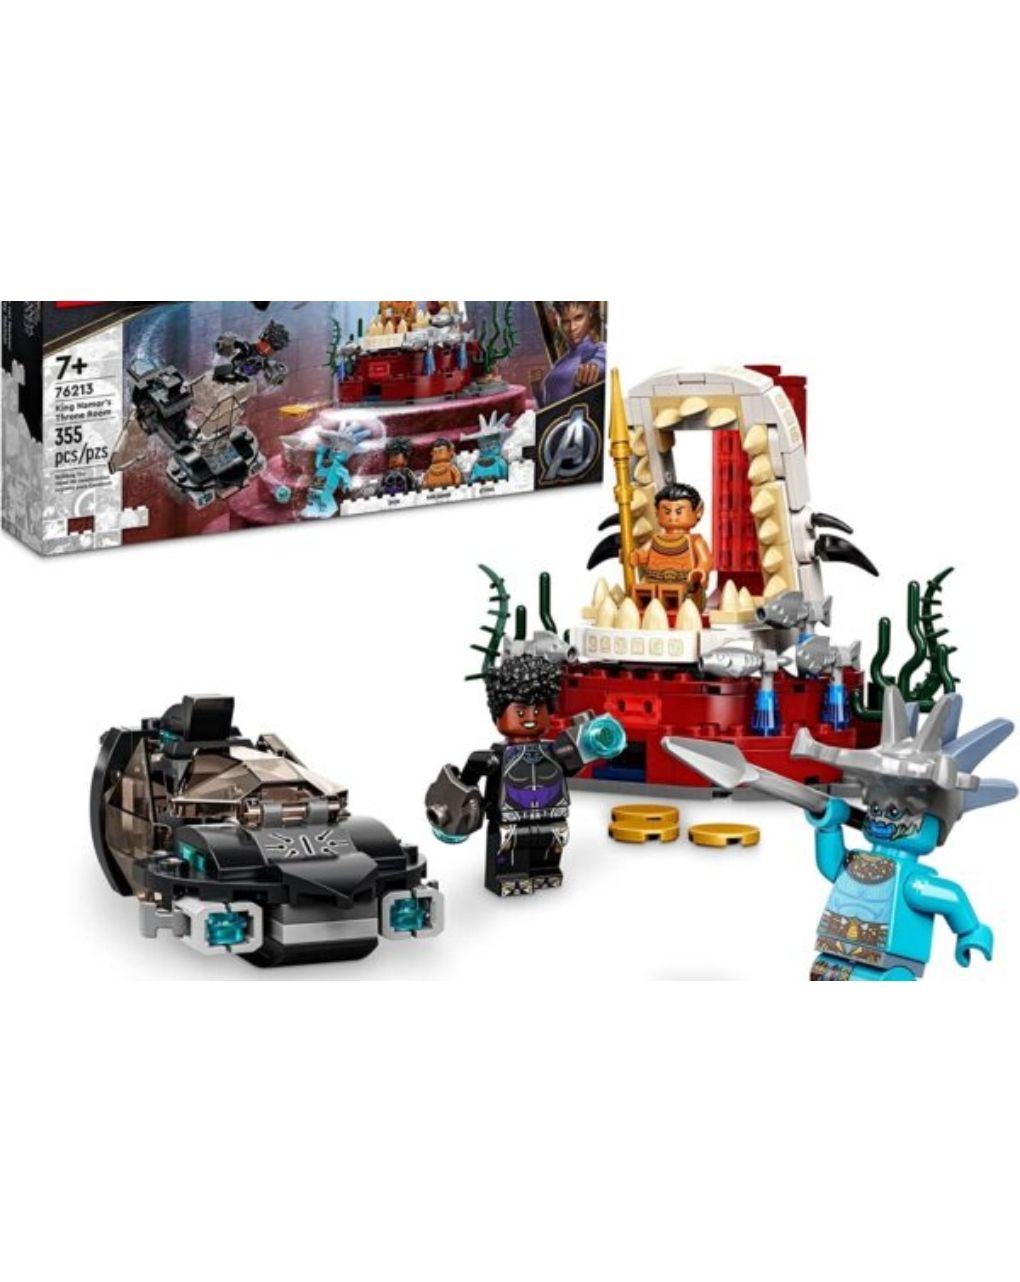 Lego super heroes black panther king namor’s throne room 76213